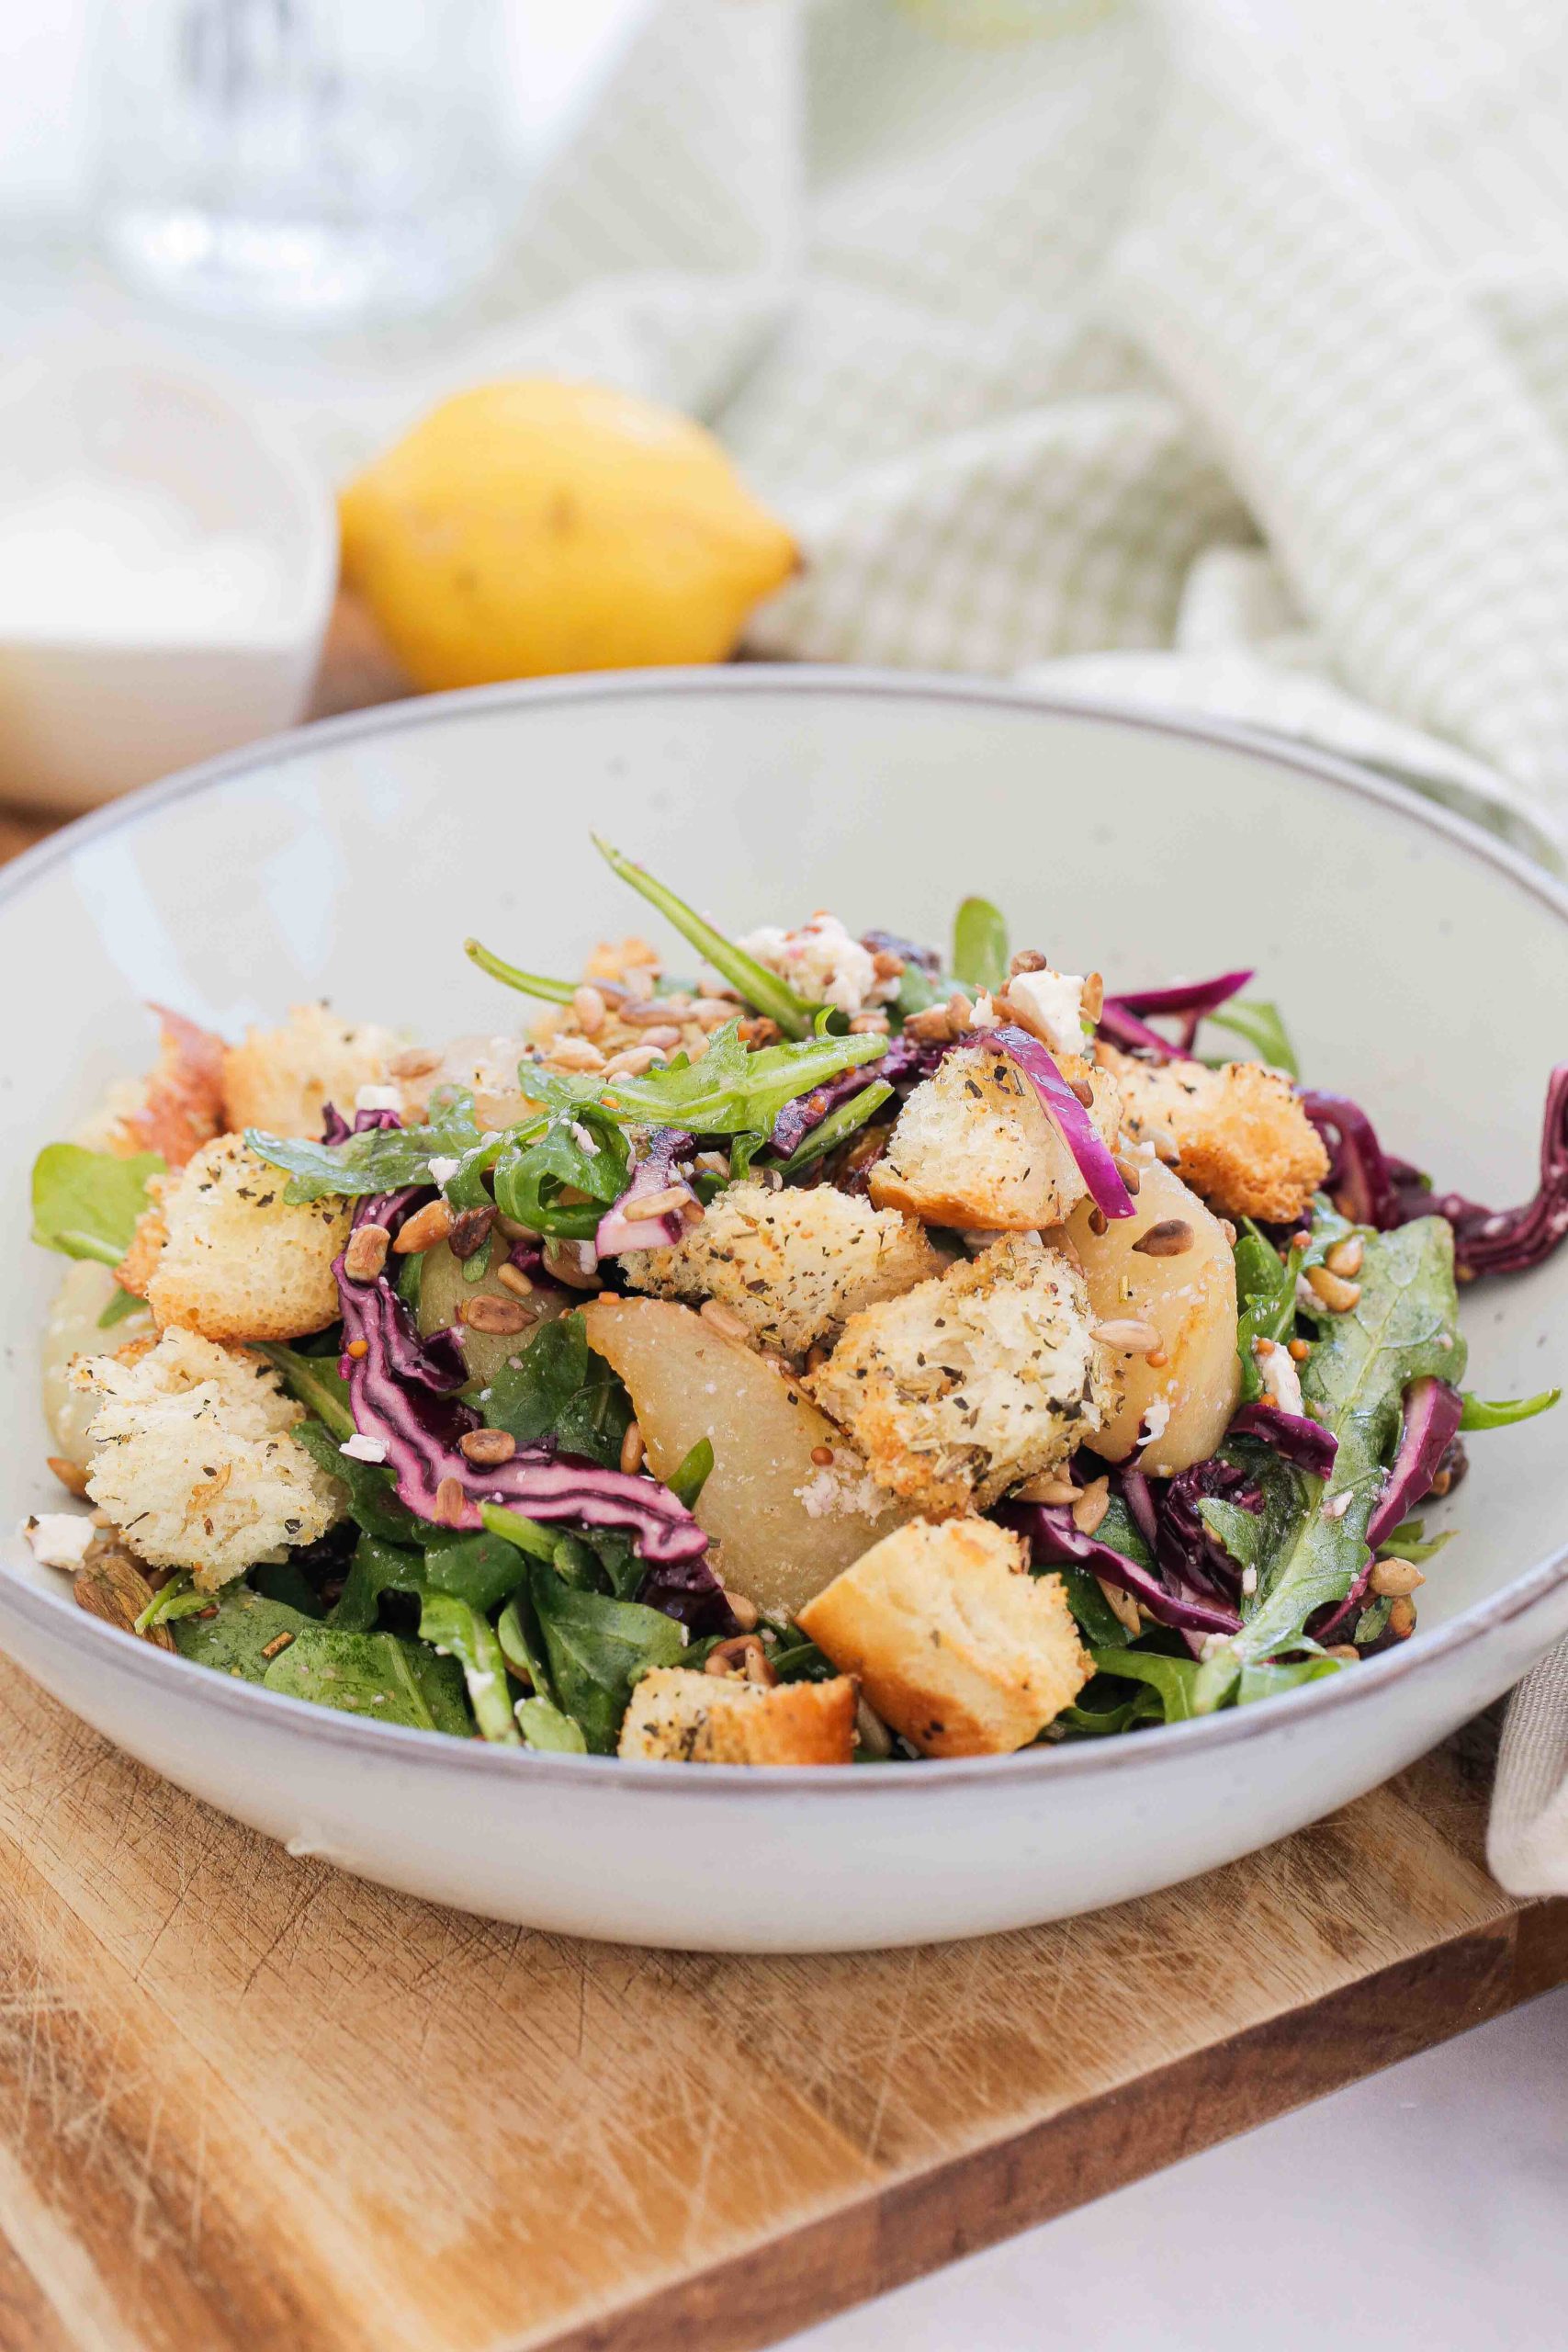 Pear Salad with Red Cabbage and Homemade Croutons